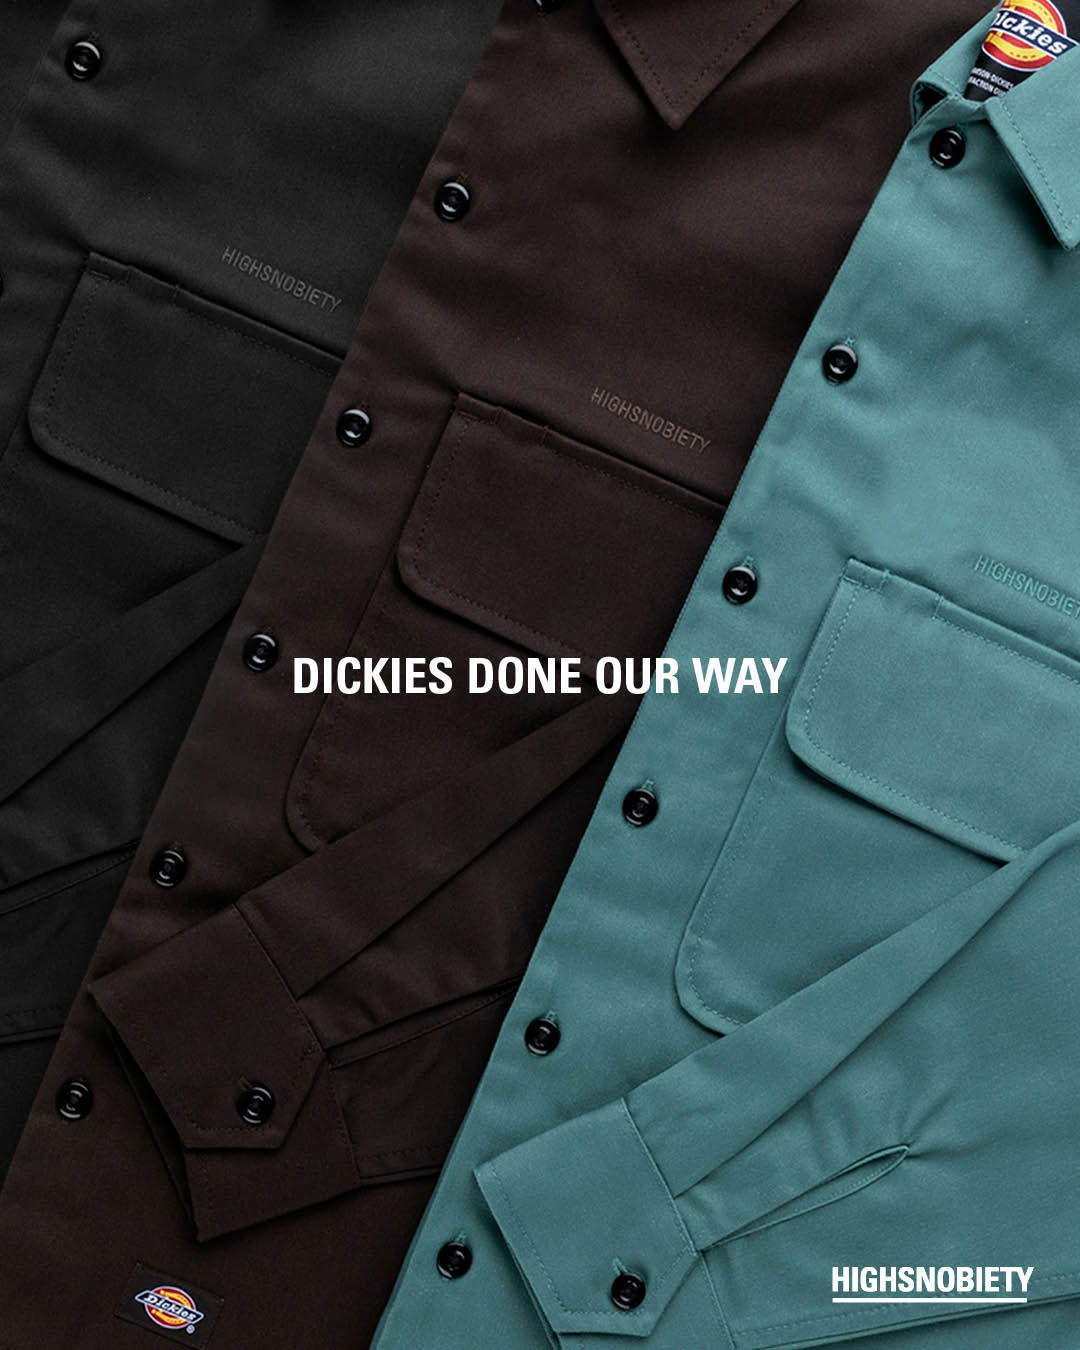 highsnobiety on X: A$AP Rocky's favorite Dickies pants can be